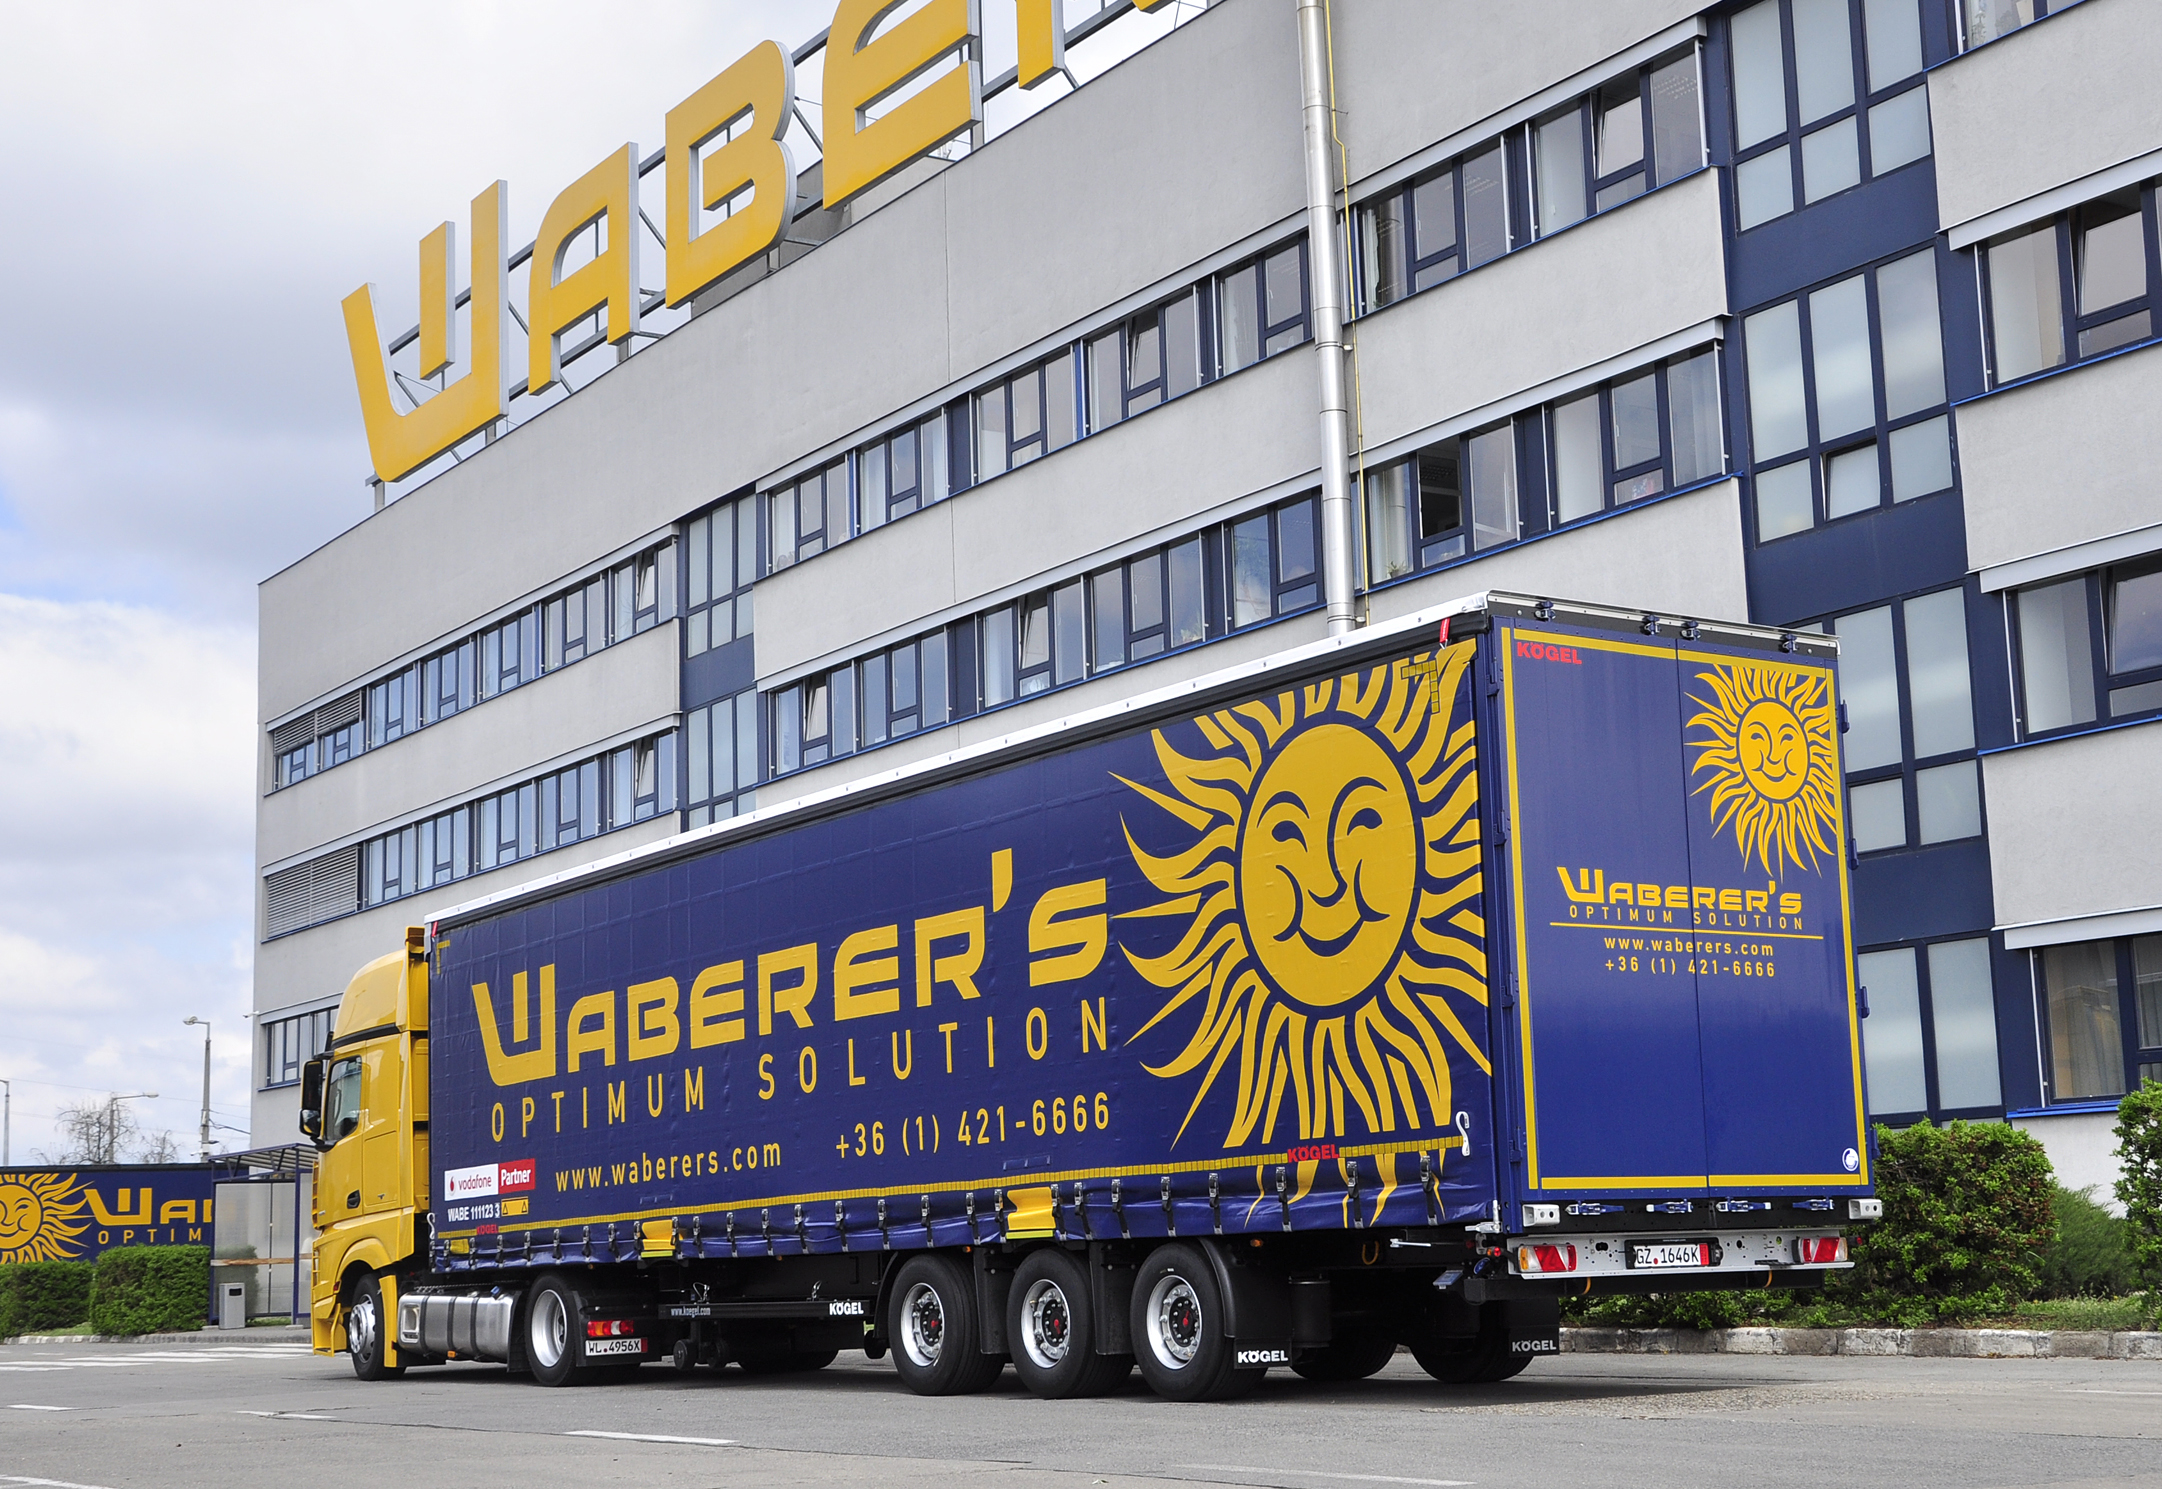 Waberer’s saw double-digit growth in revenue in Q2/2018